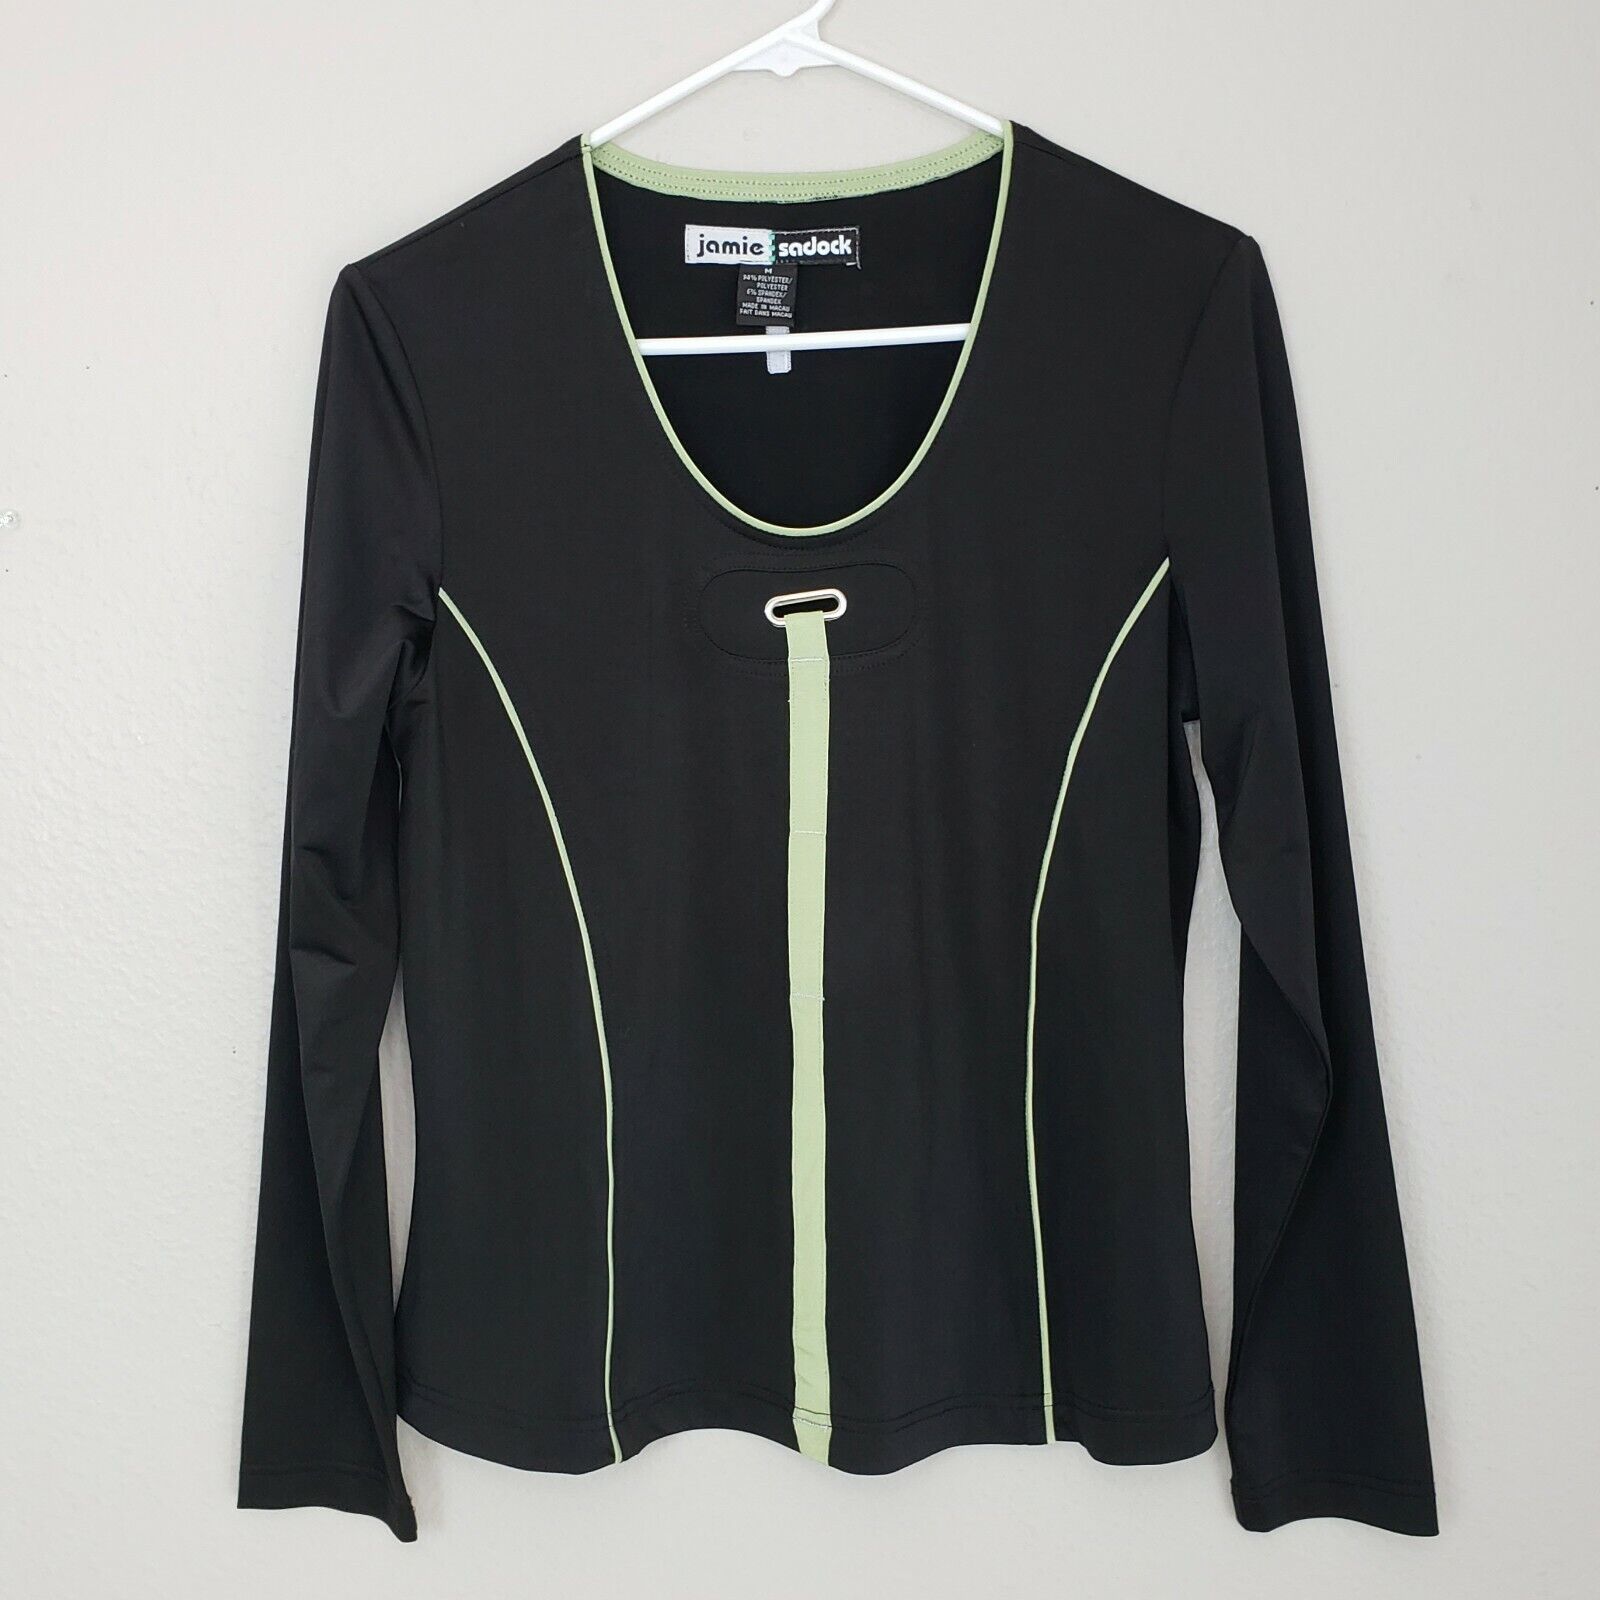 Jamie Sadock SEAL limited product Long Sleeve Pullover Top Shirt Size Miami Mall Golf Me Women's